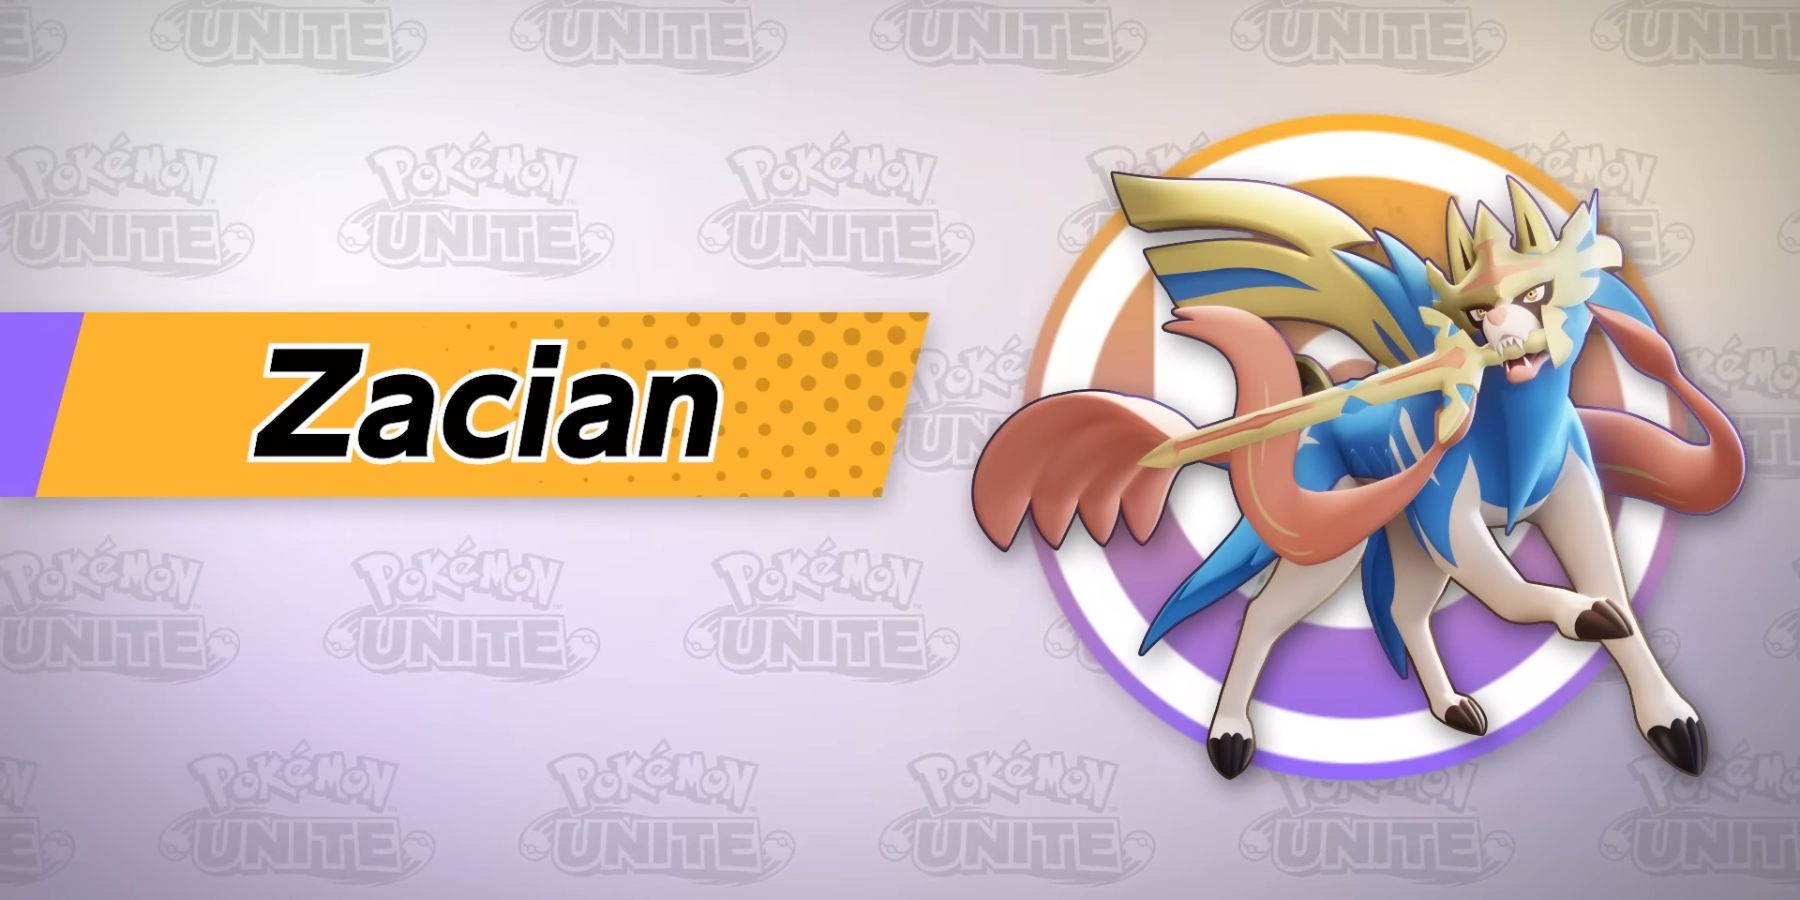 Pokemon Unite's Zacian wields a sword in its mouth accompanied by the text on the left saying its name, "Zacian."